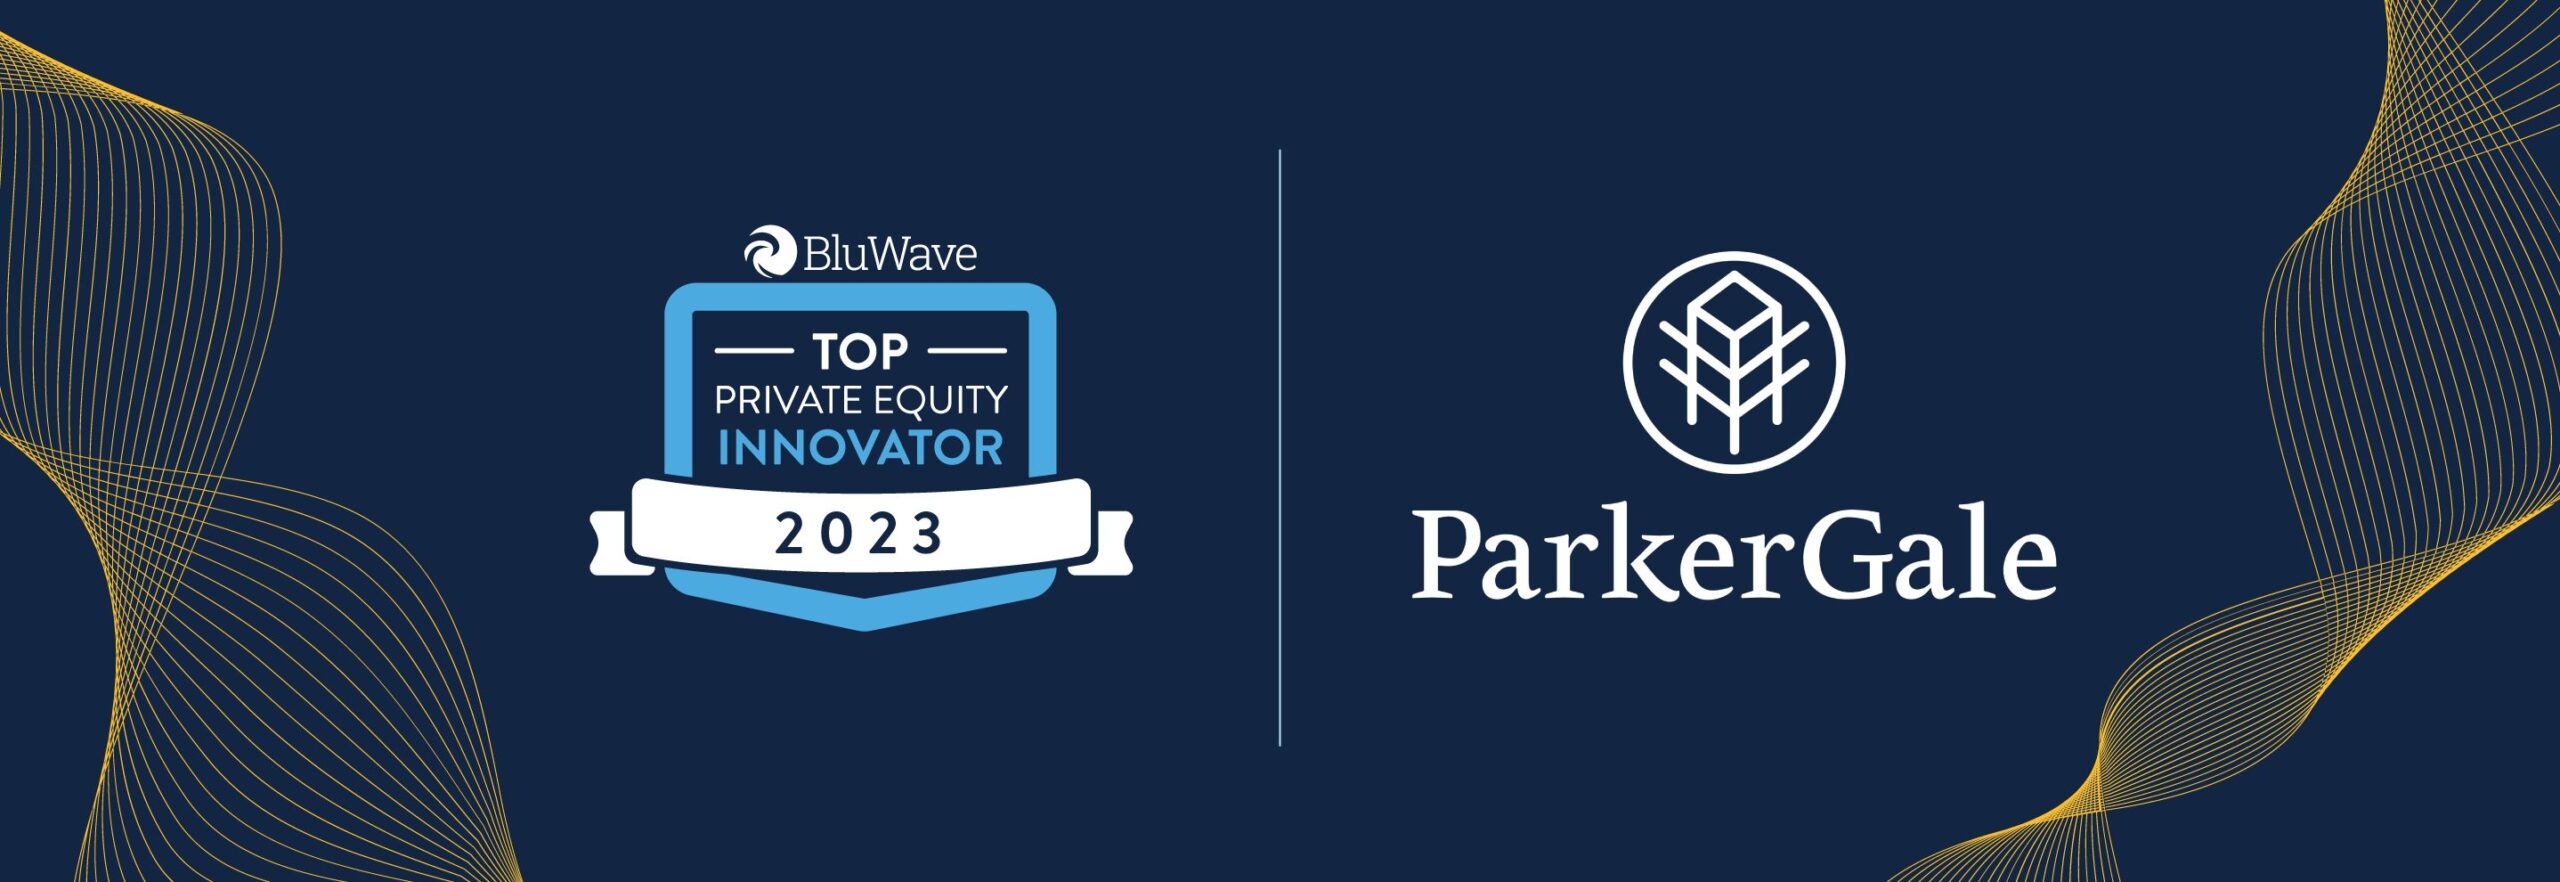 BluWave Awards 2023: ParkerGale is PE Innovator of the Year